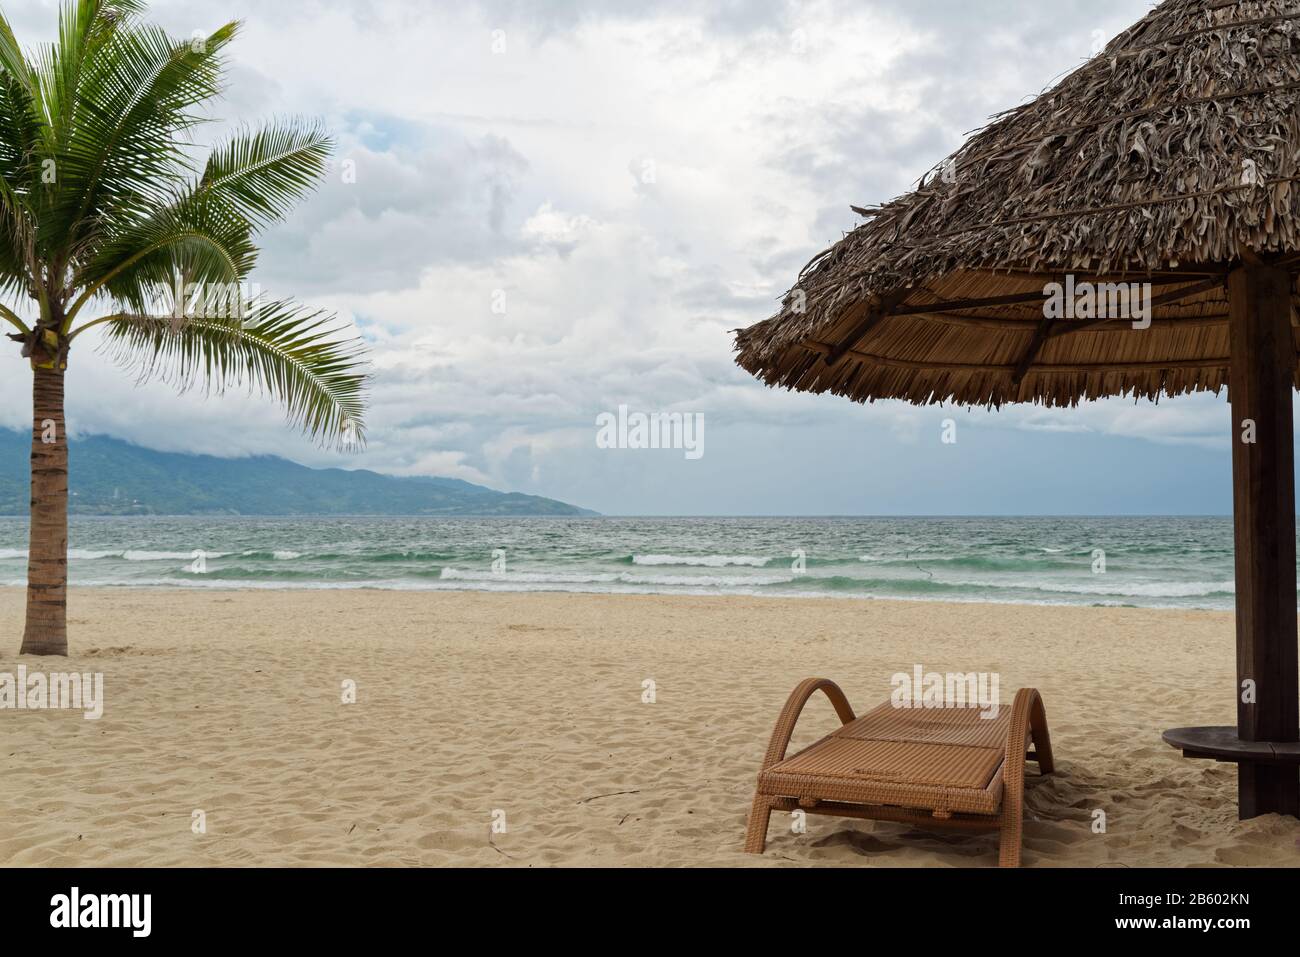 Holiday scene of lounger and straw parasol on tropical sandy beach against sea and cloudy sky. My Khe beach in Da Nang, Vietnam Stock Photo